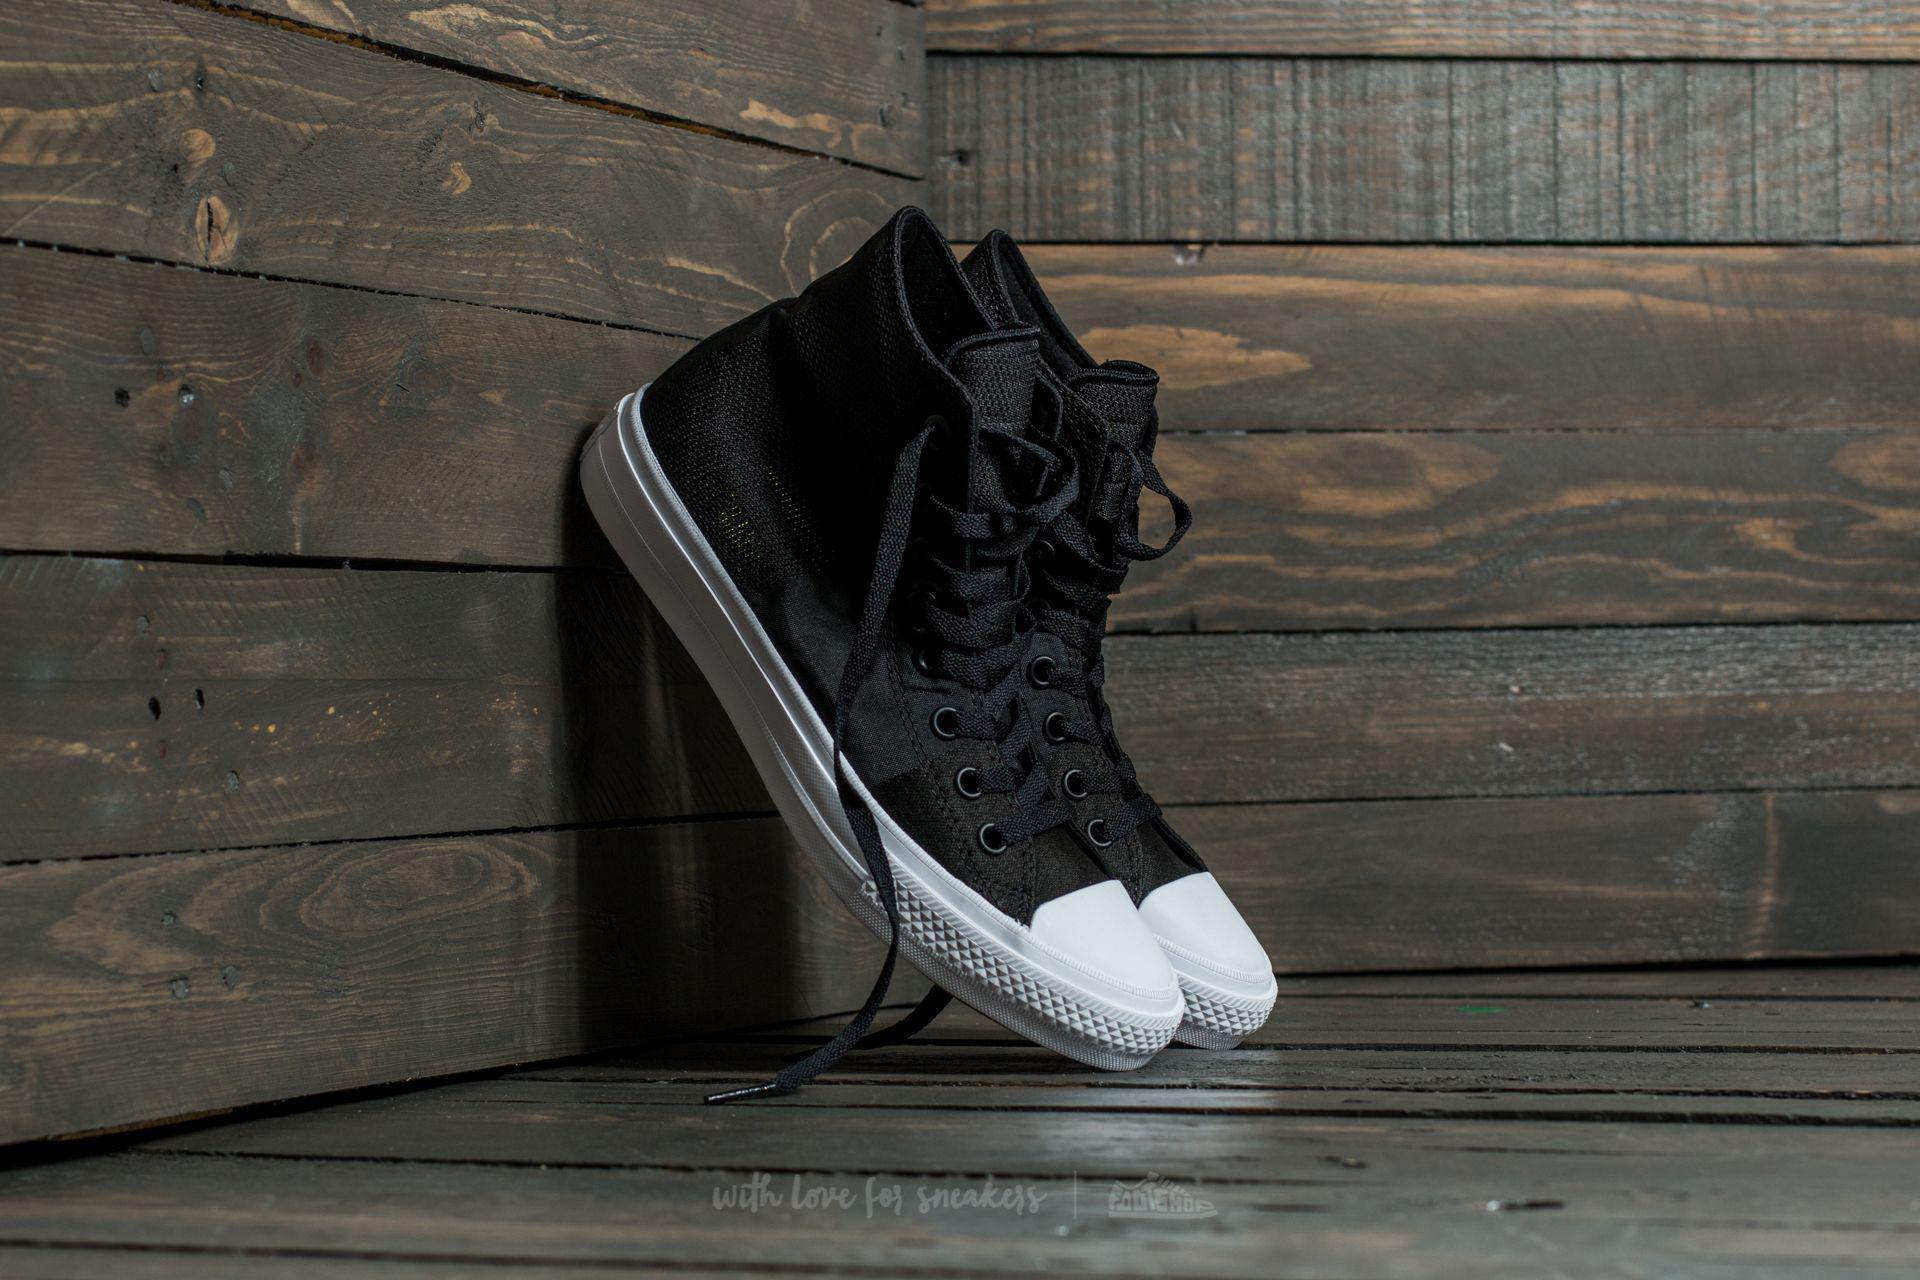 converse chuck taylor all star desert storm leather